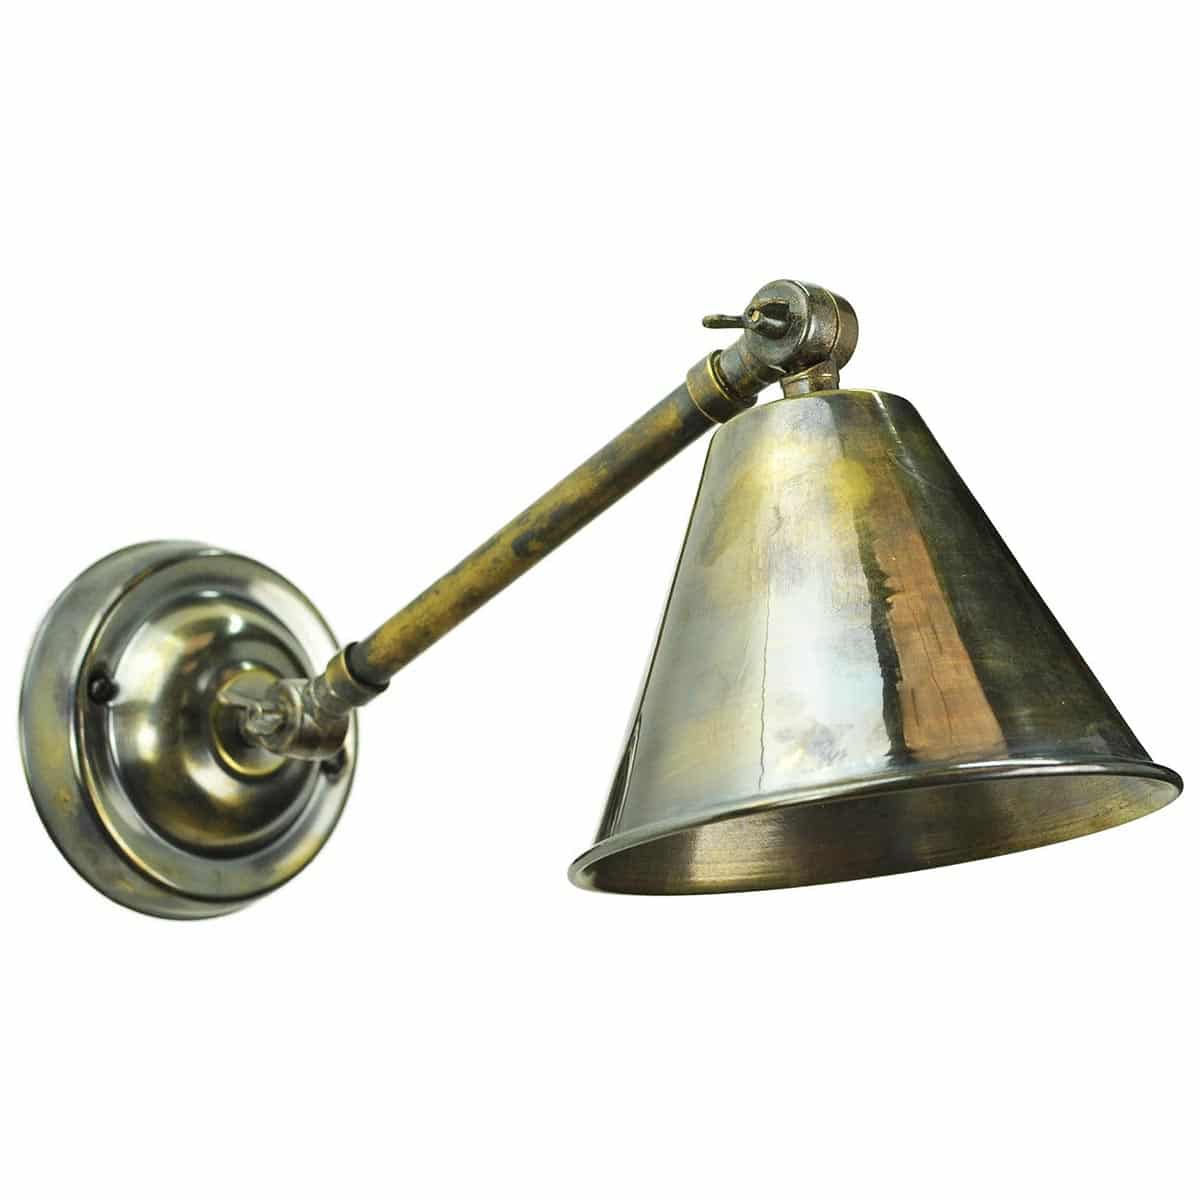 Map Room Nautical 1 Lamp Hinged Wall Light Solid Antique Brass